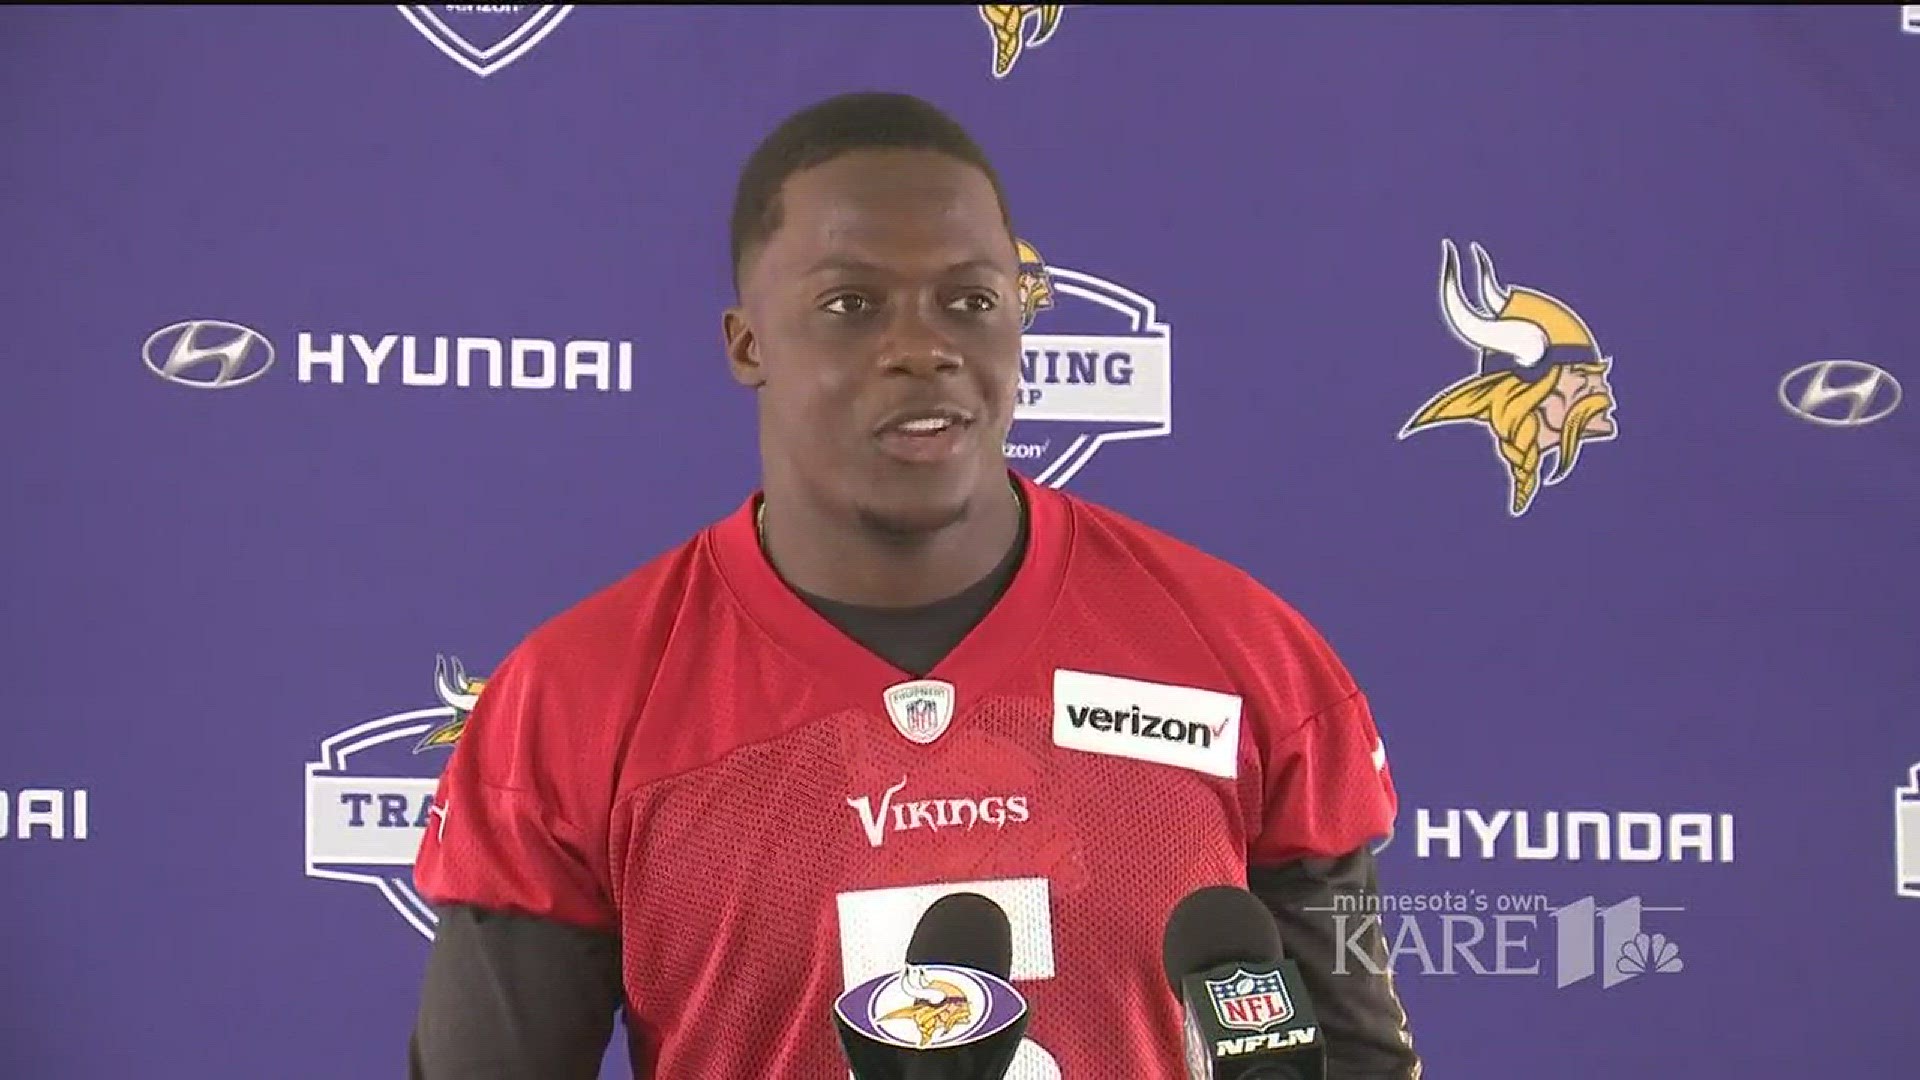 Teddy Bridgewater says he hasn't had any setbacks in his recovery from the massive injury to his left knee he suffered nearly a year ago in practice with the Minnesota Vikings. http://kare11.tv/2u24c5t